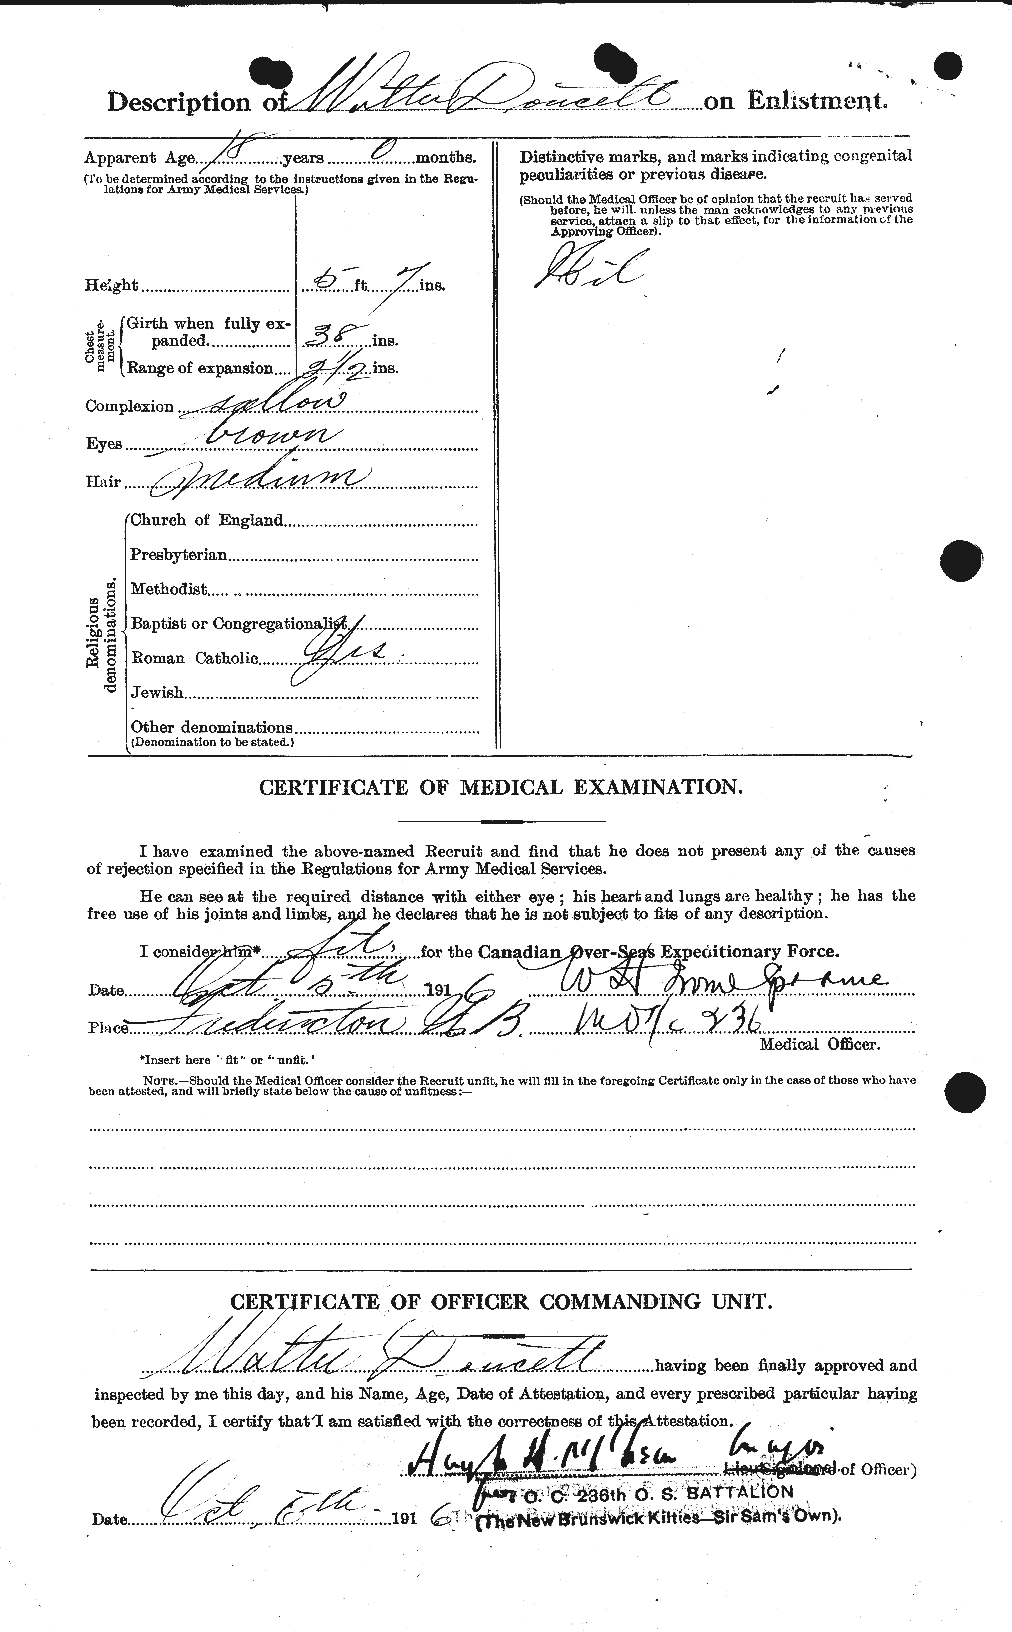 Personnel Records of the First World War - CEF 301348b